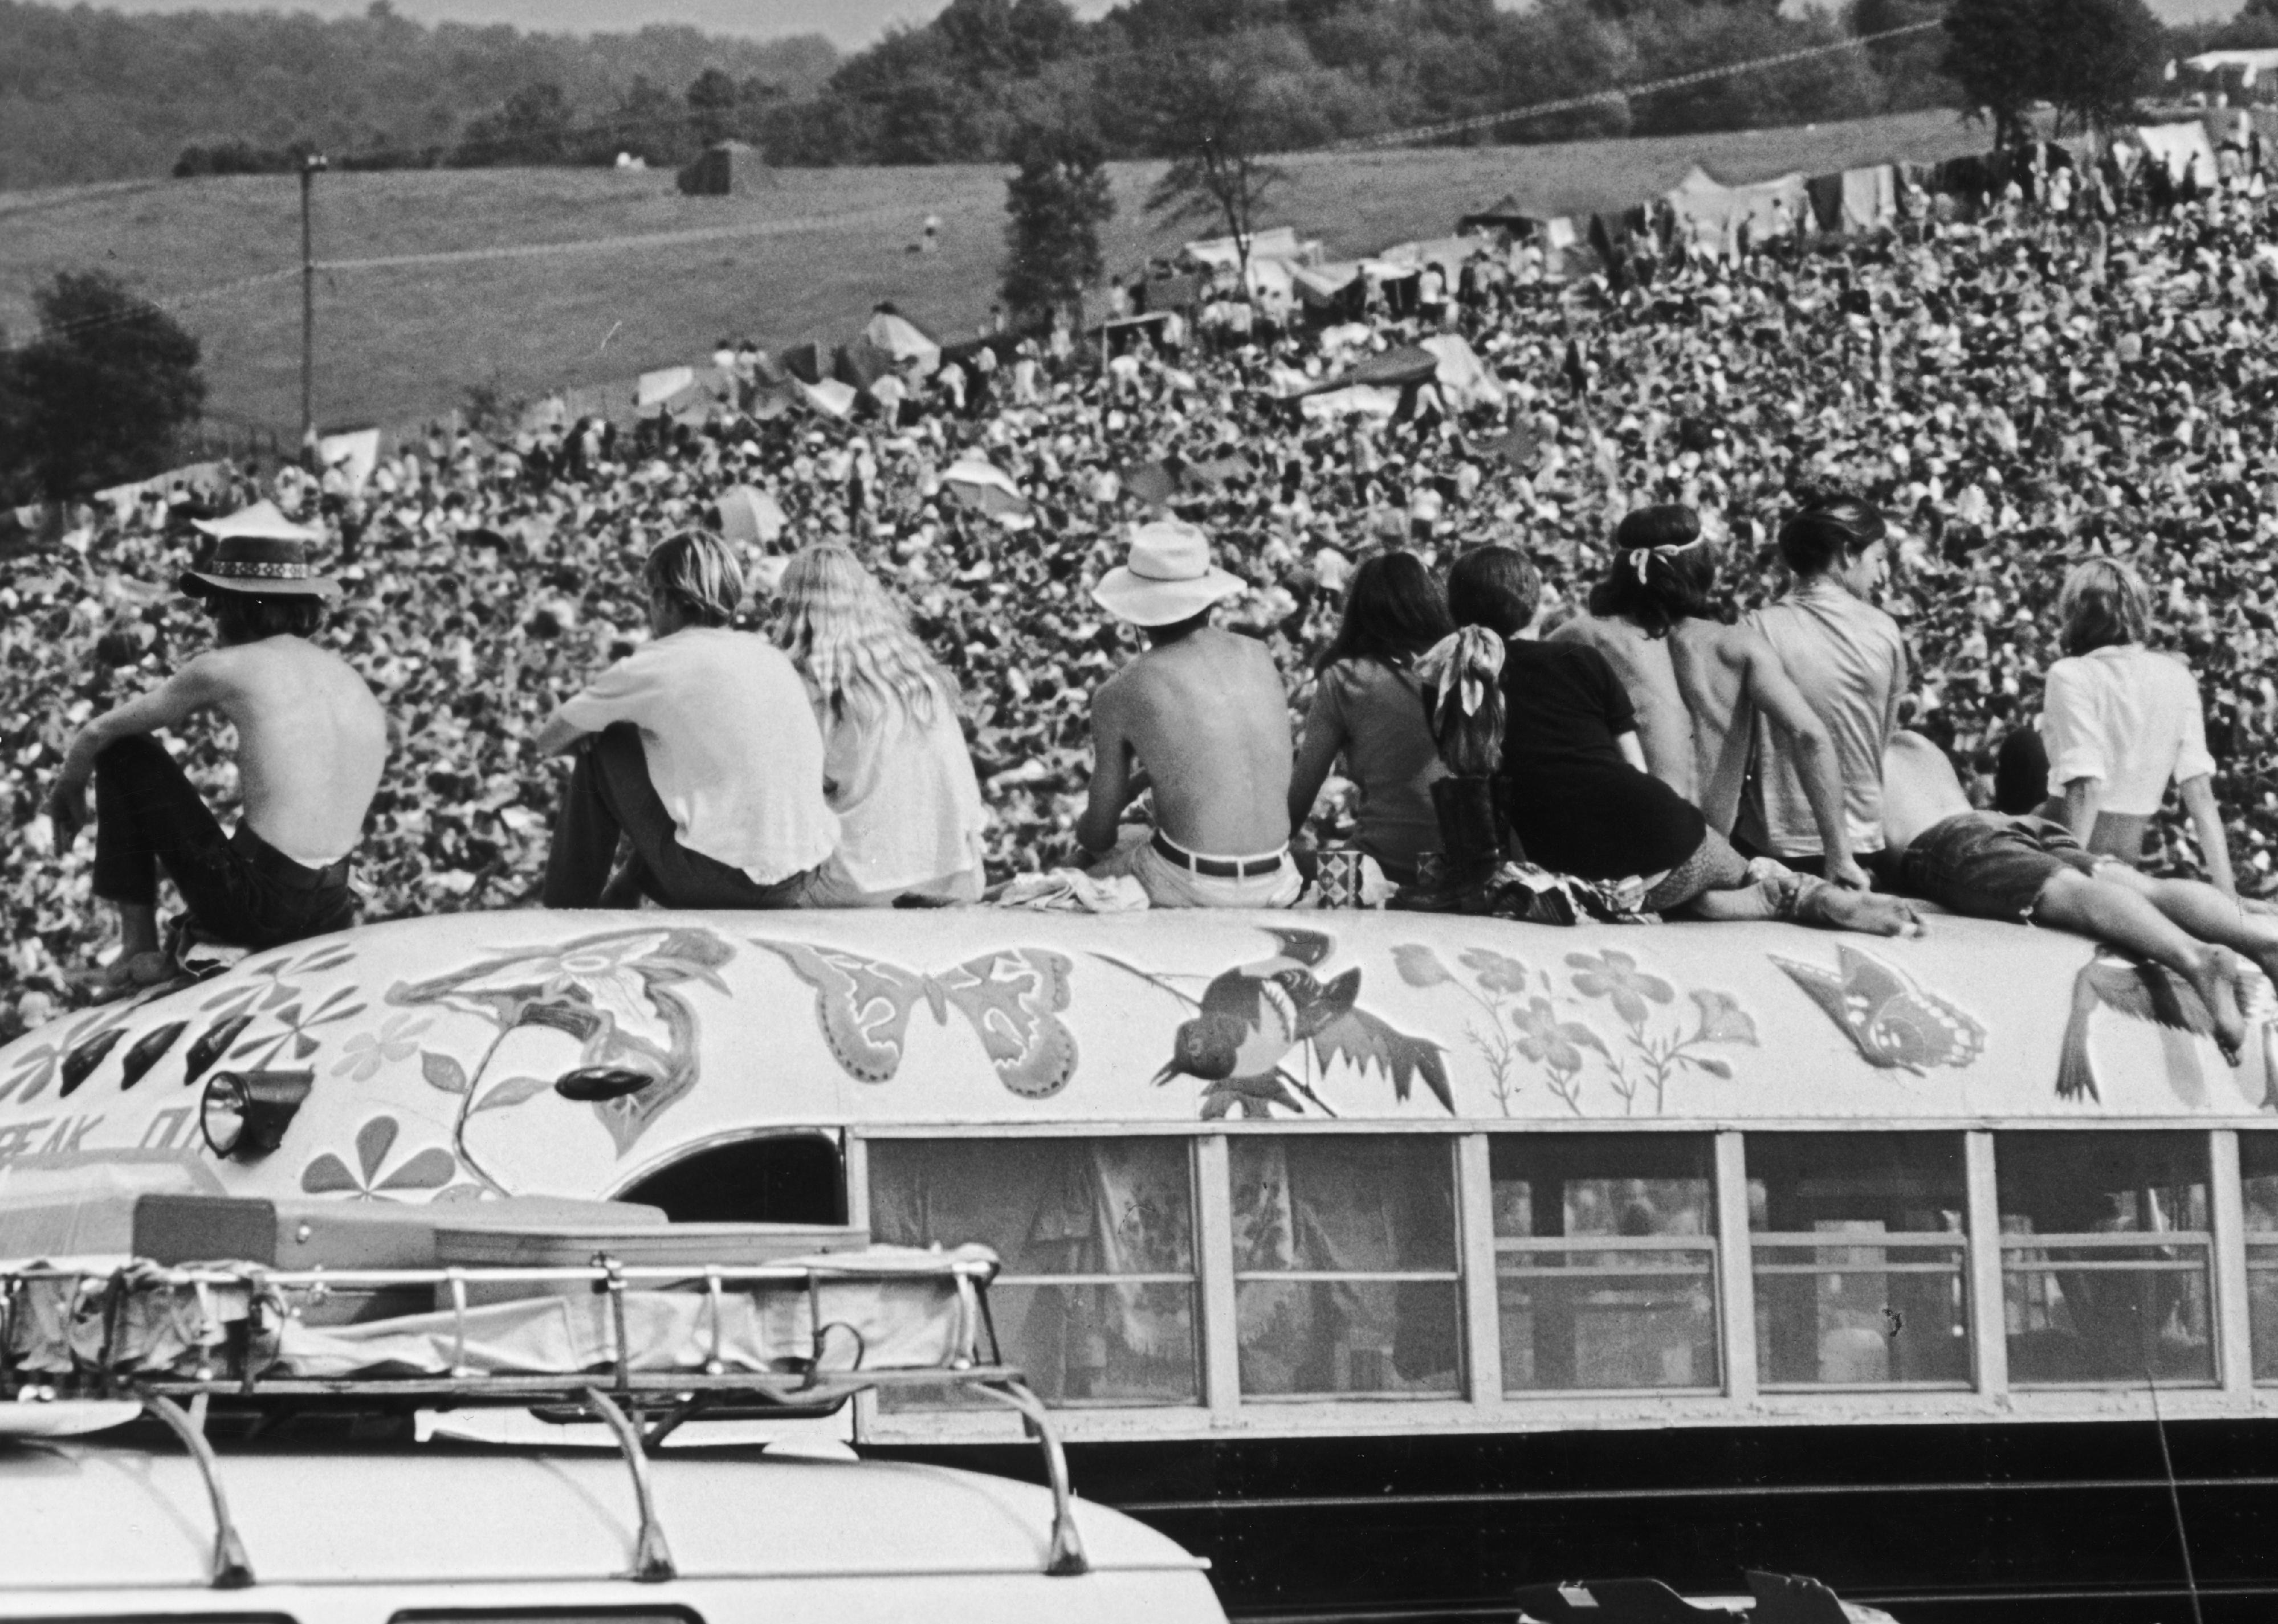 Fans sitting on top of a painted bus at the Woodstock Music Festival.